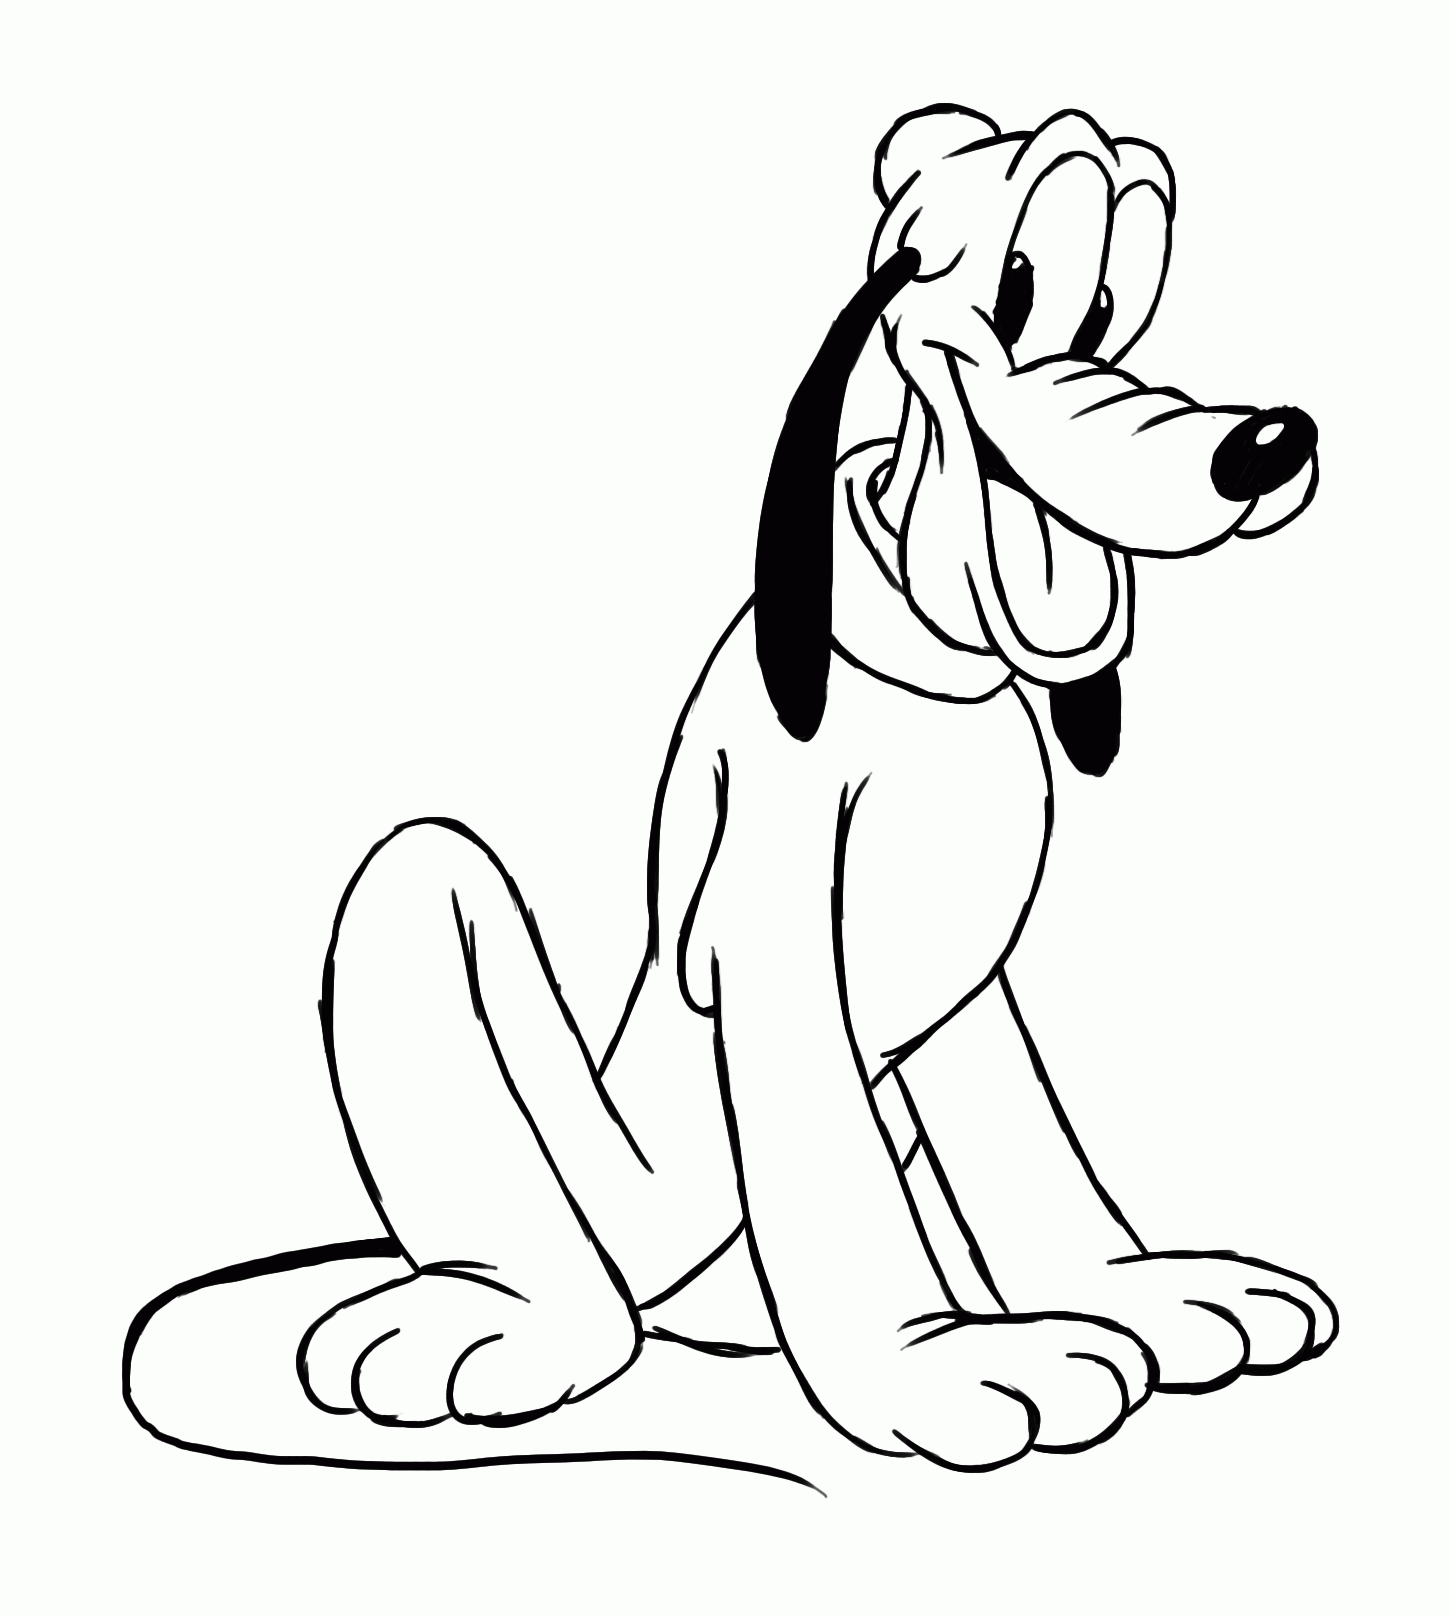 Pluto Coloring Pages Disney - Coloring Page